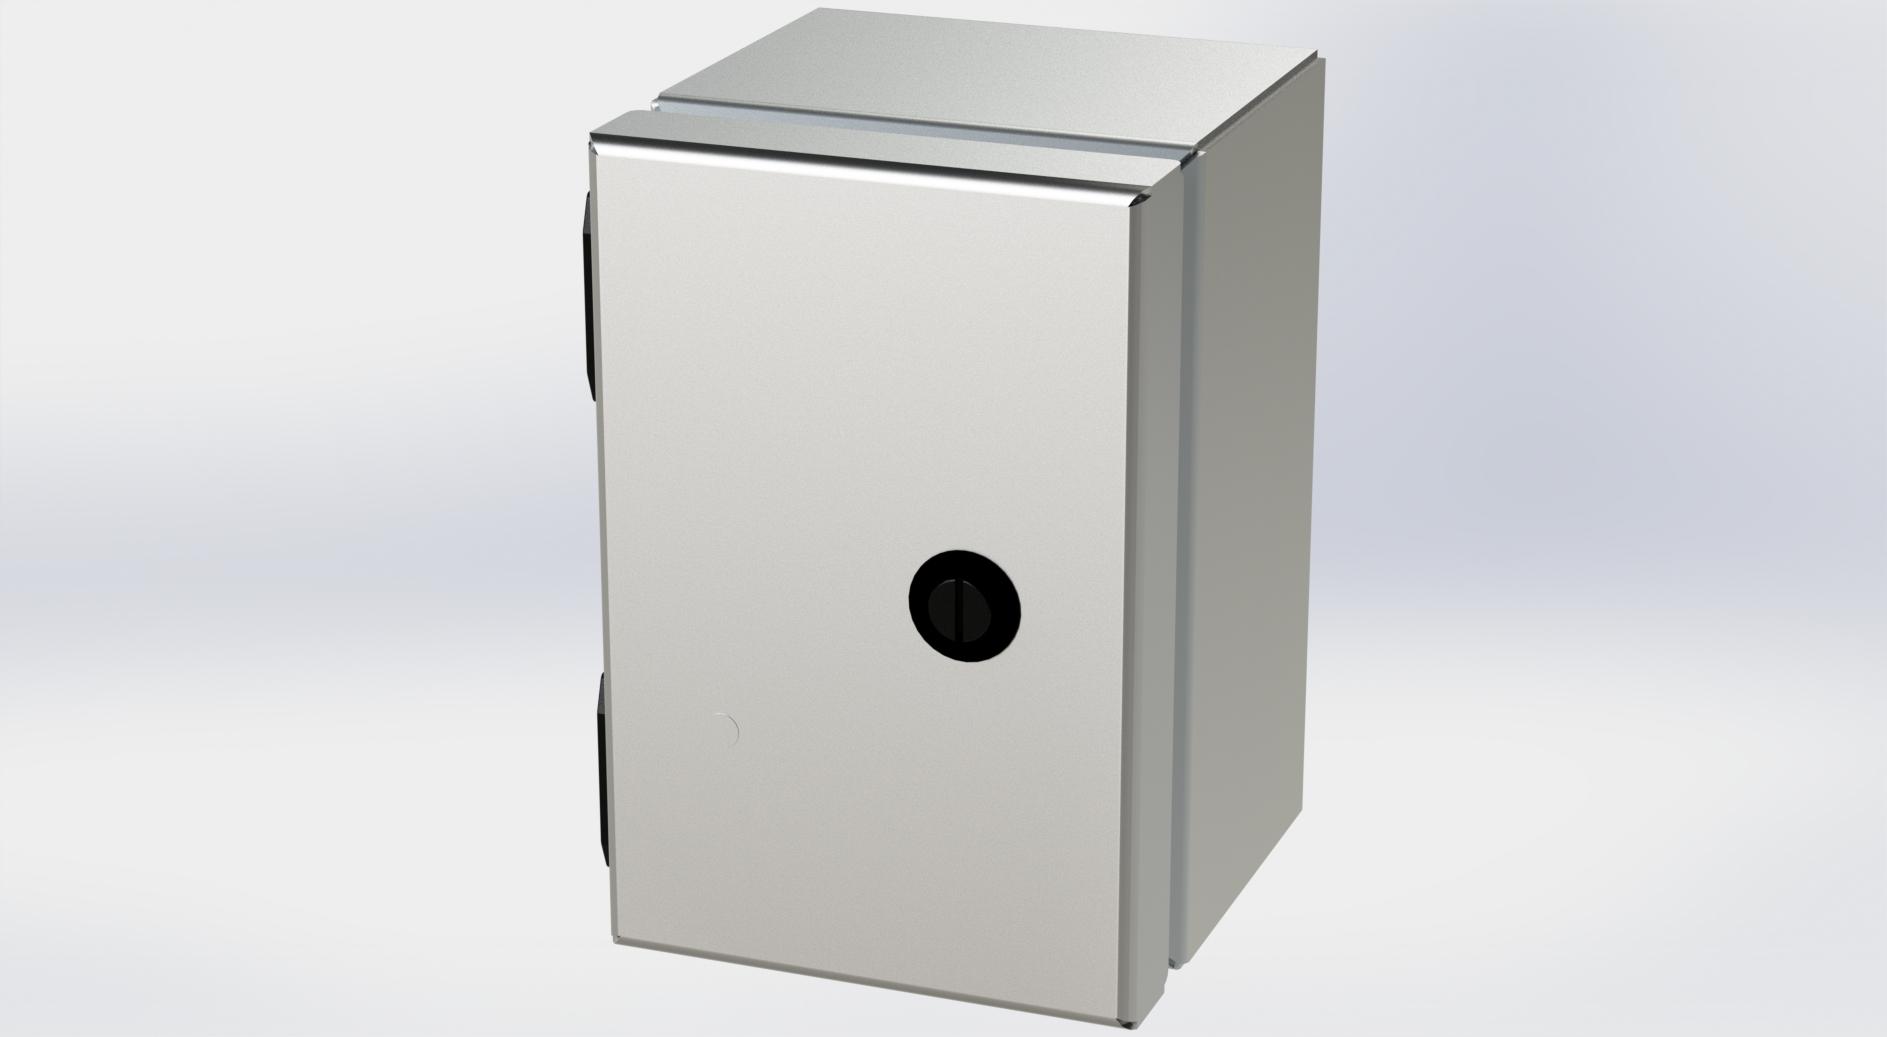 Saginaw Control SCE-604ELJSS S.S. ELJ Enclosure, Height:6.00", Width:4.00", Depth:4.00", #4 brushed finish on all exterior surfaces. Optional sub-panels are powder coated white.